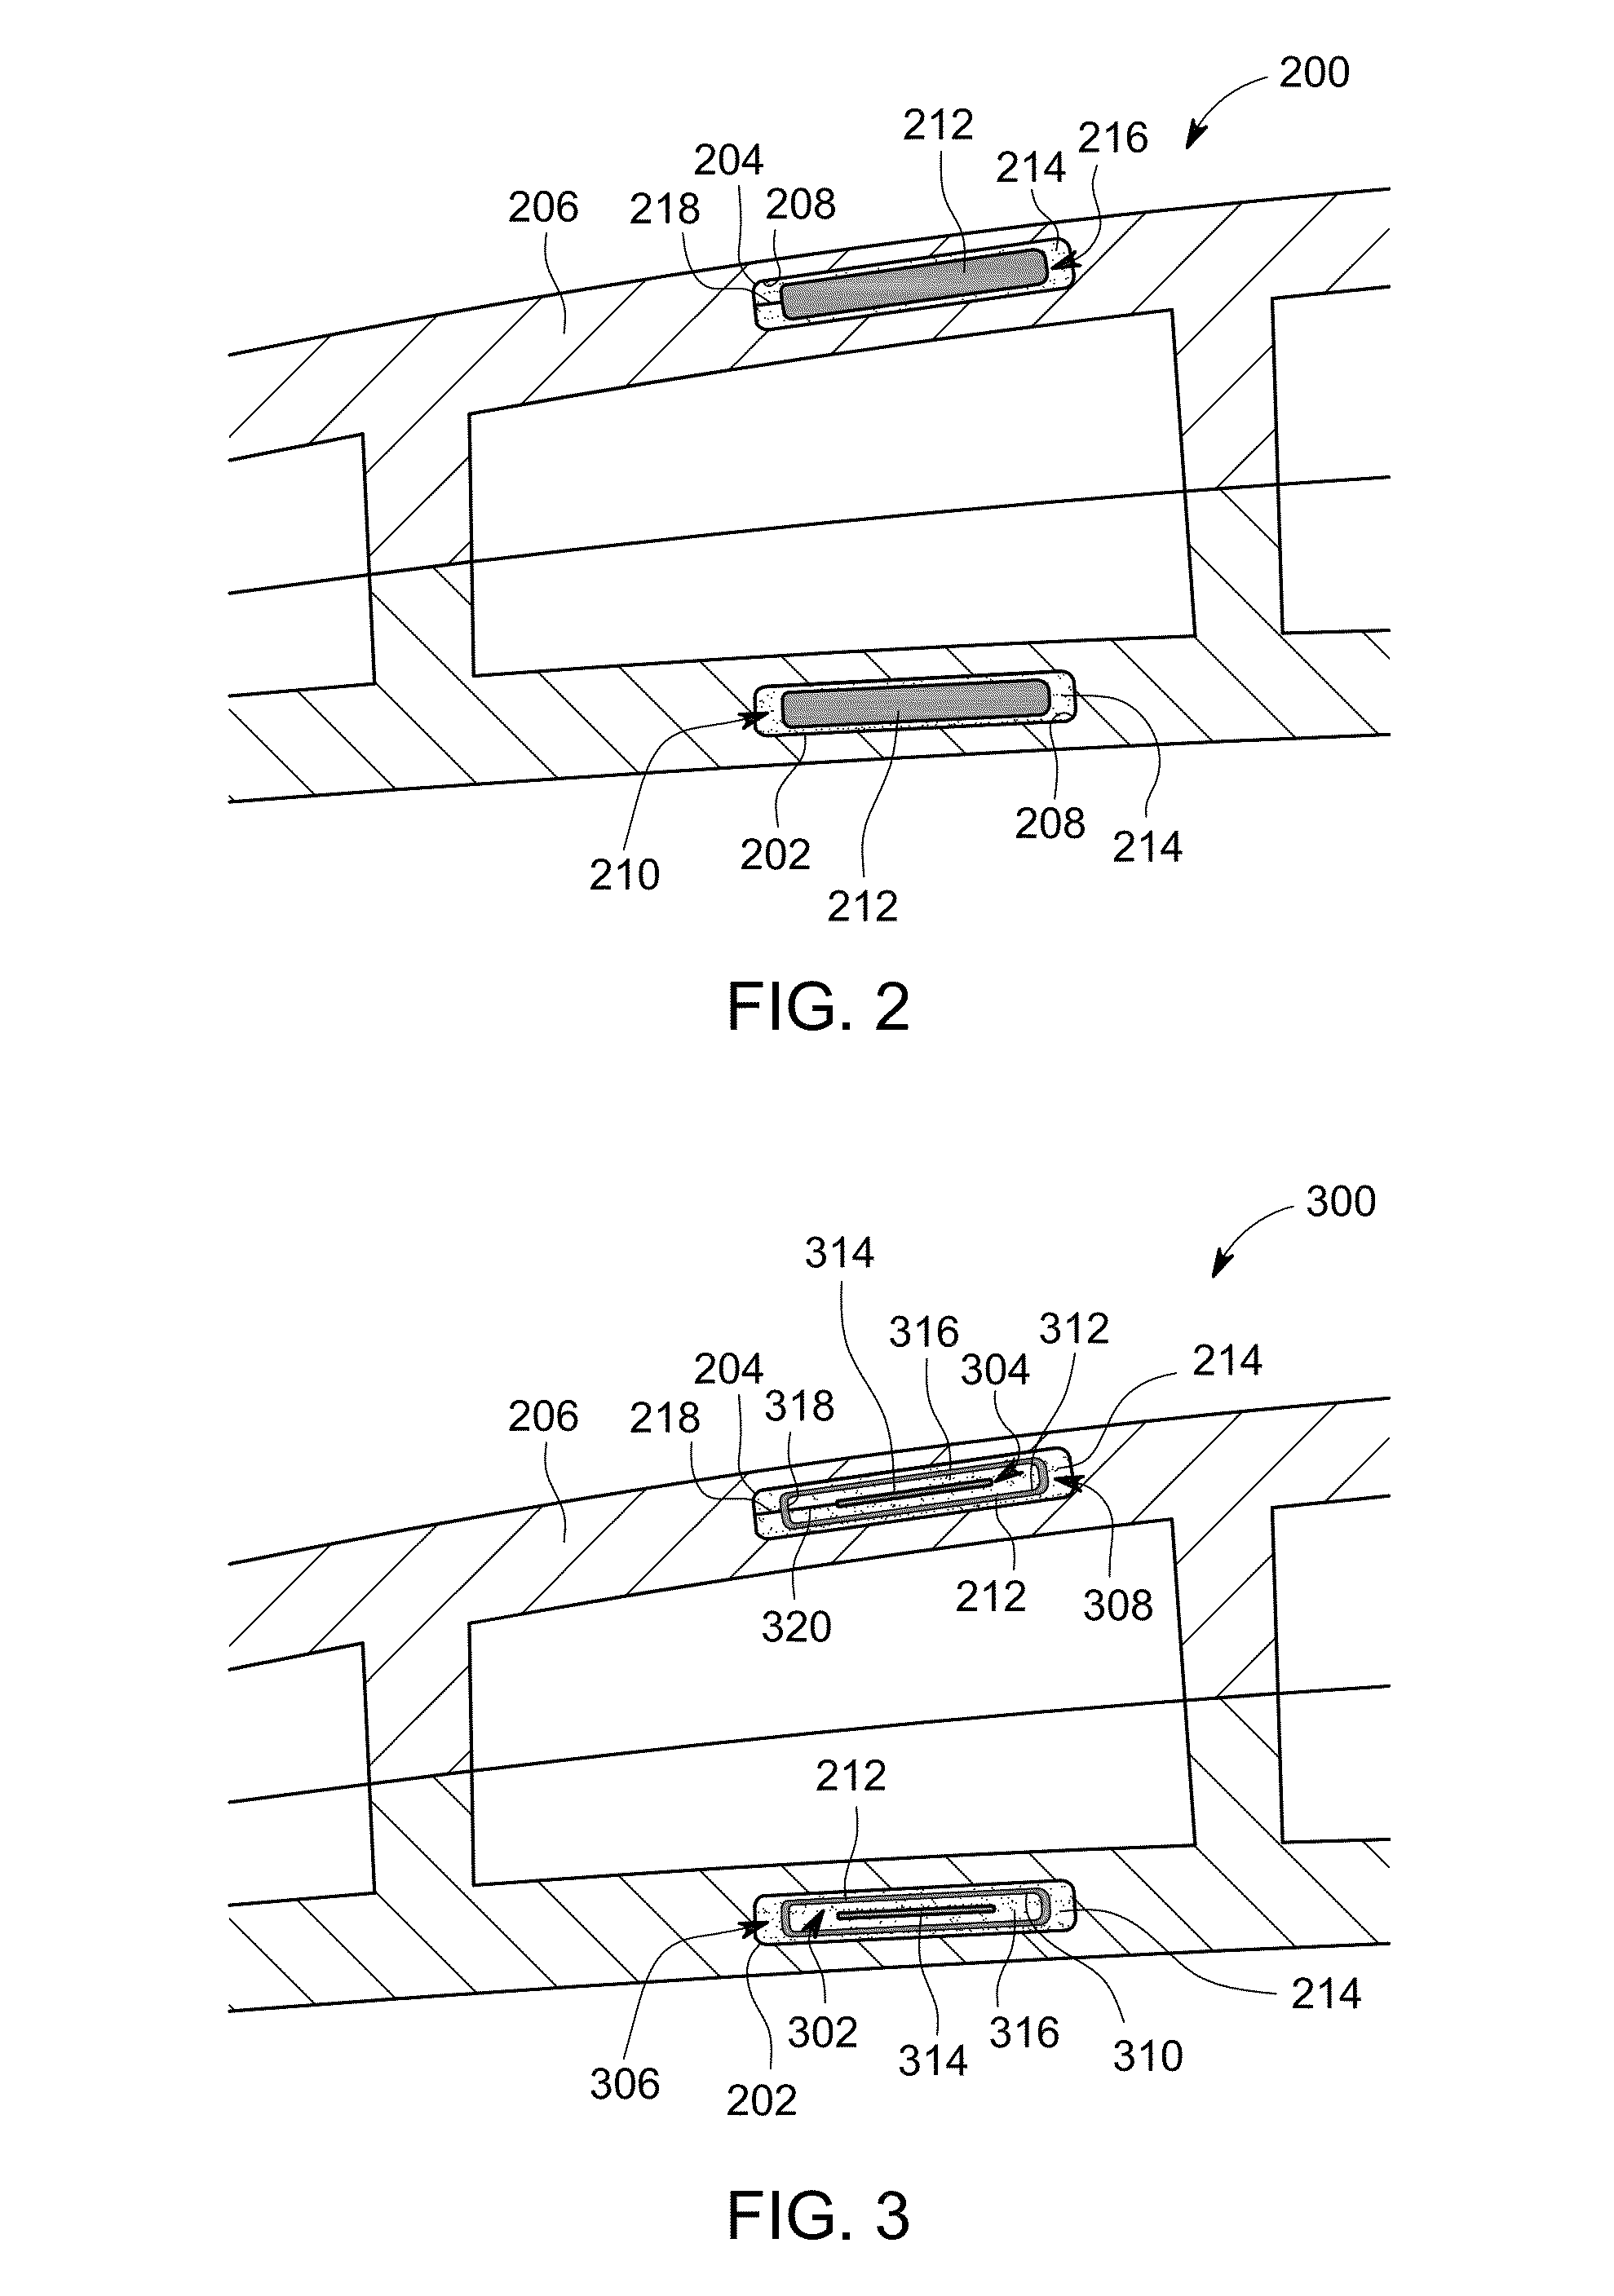 Components having vibration dampers enclosed therein and methods of forming such components